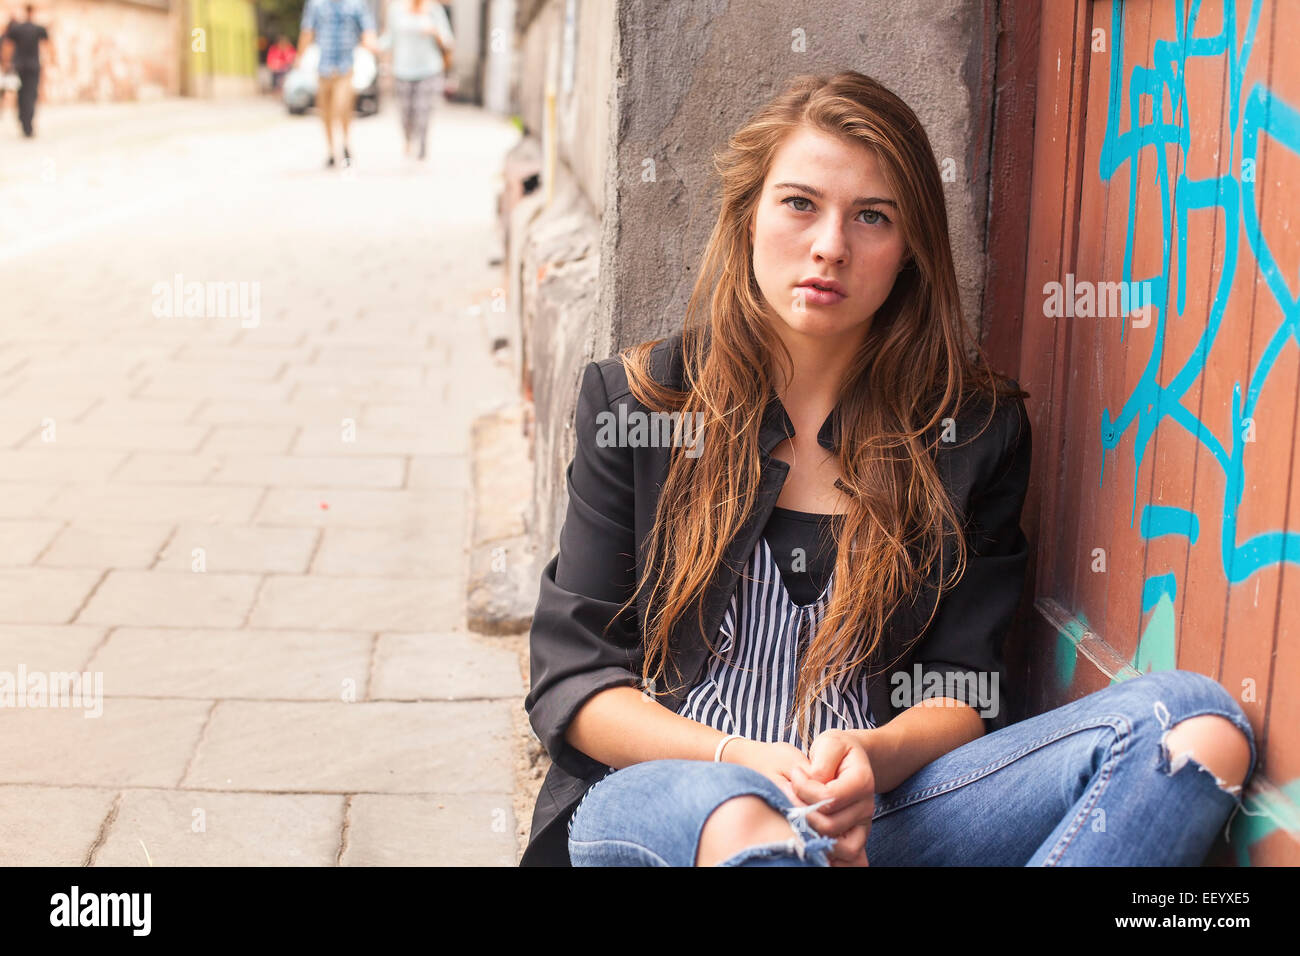 Young hipster girl sitting on the street. Stock Photo